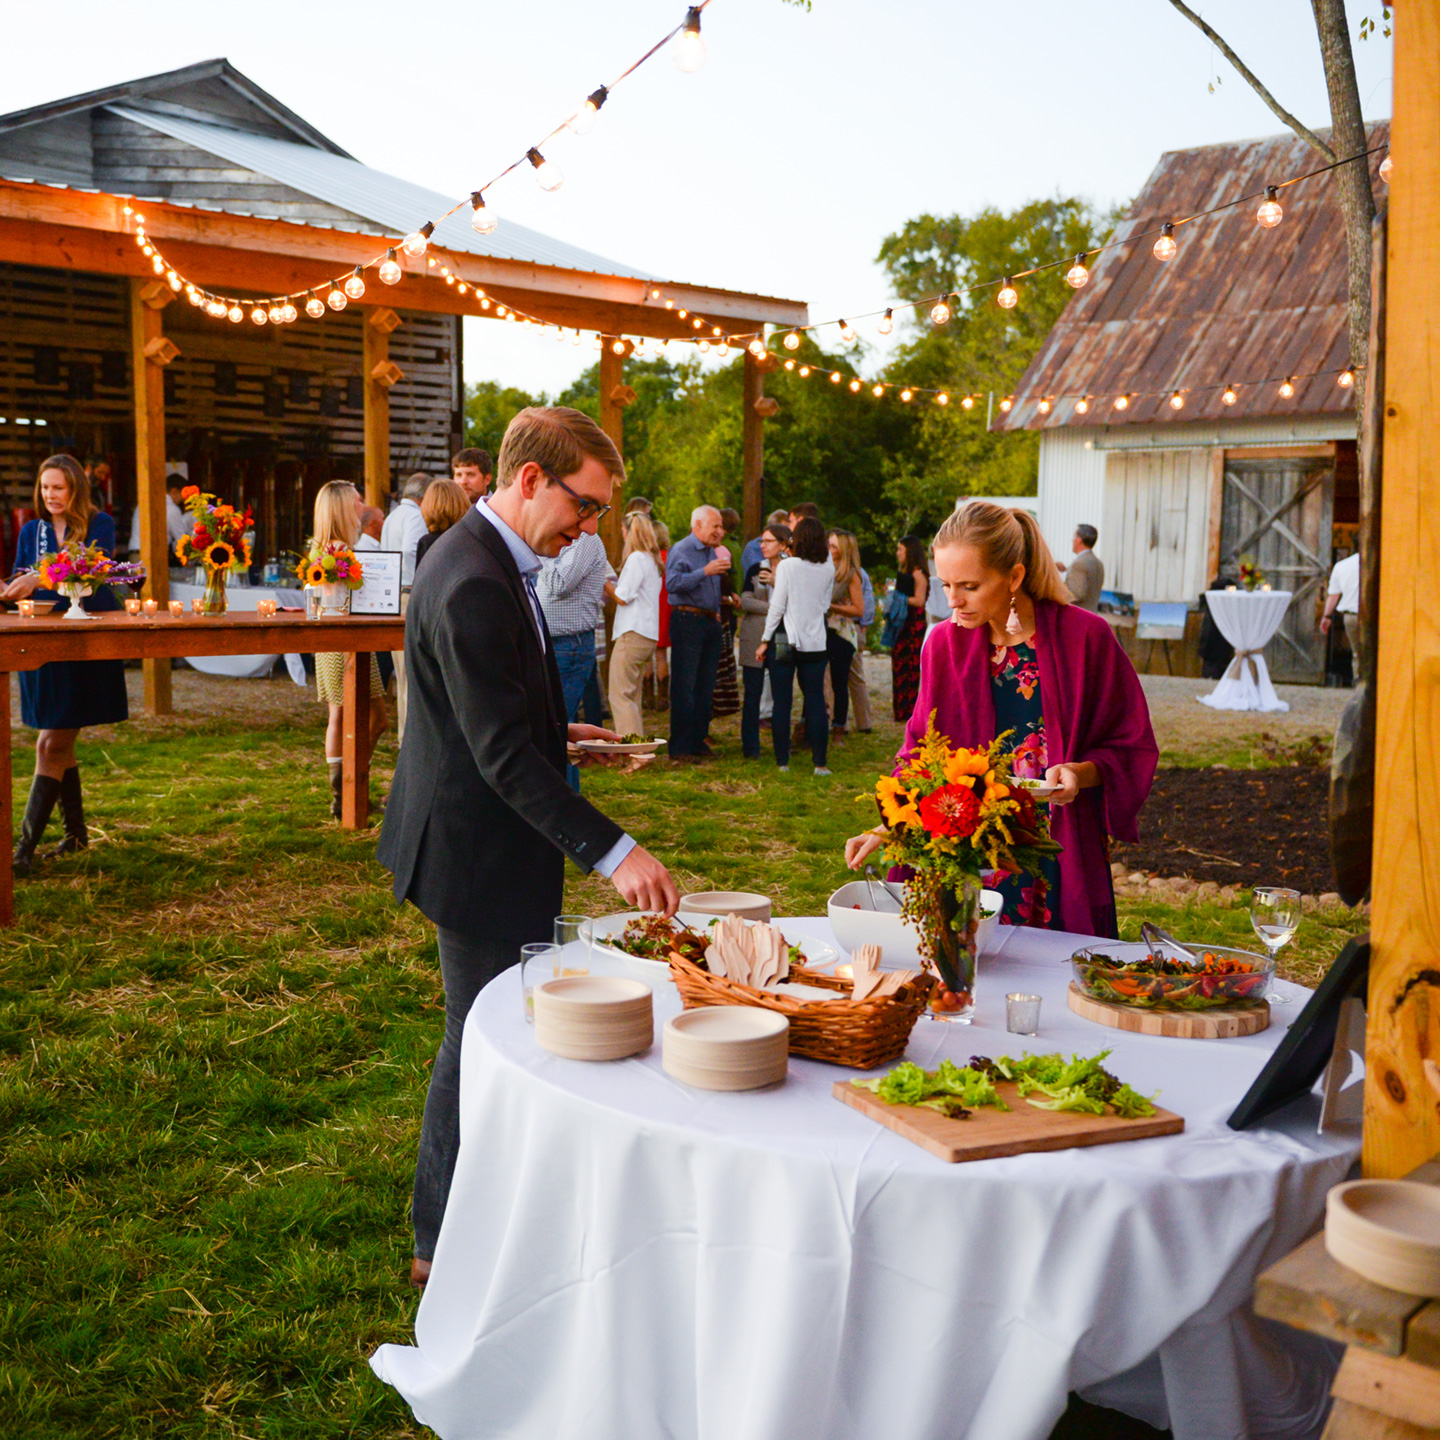 Shalom Farms | People getting snacks from table at farm event